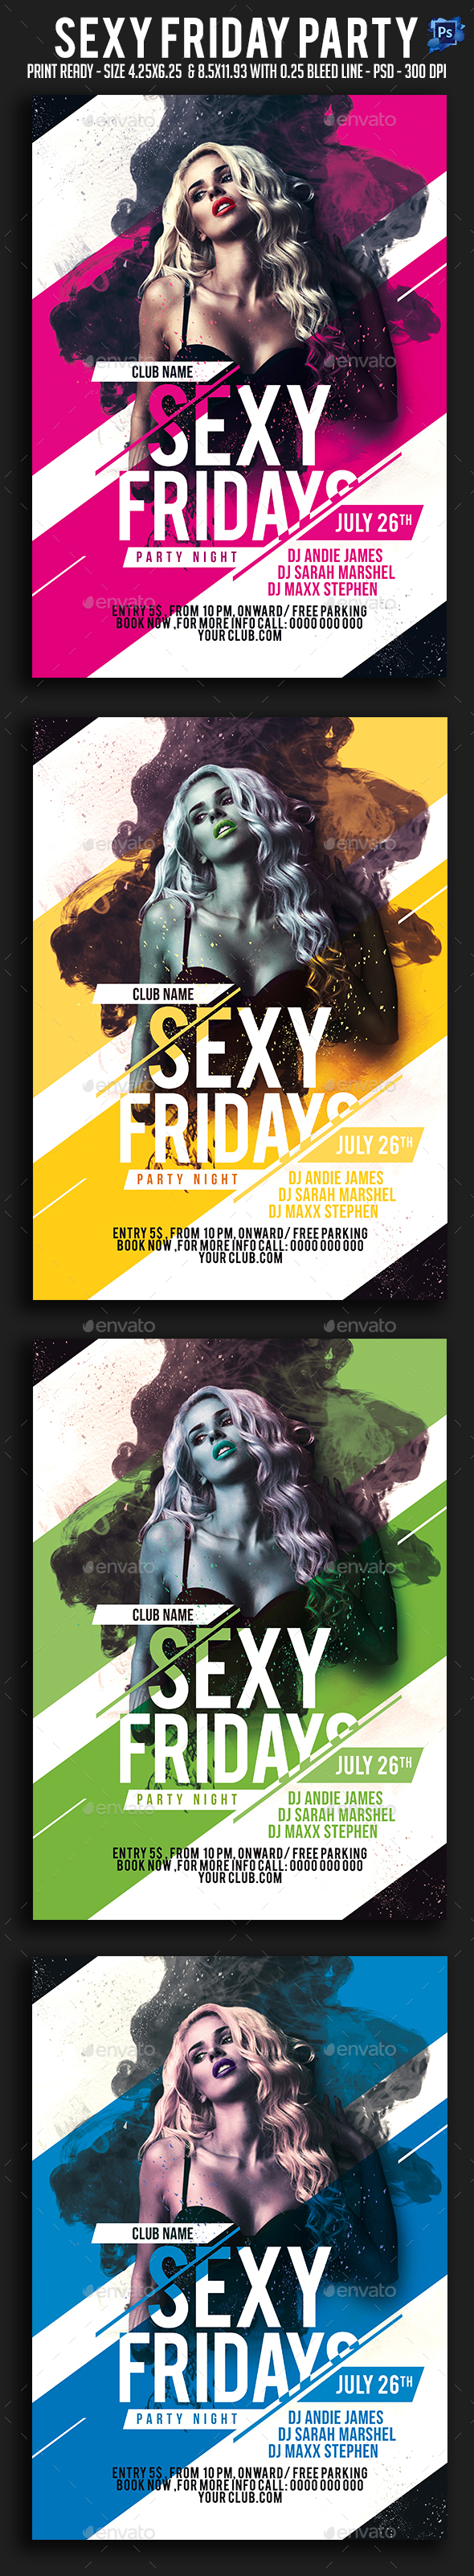 Sexy Friday Party Flyer